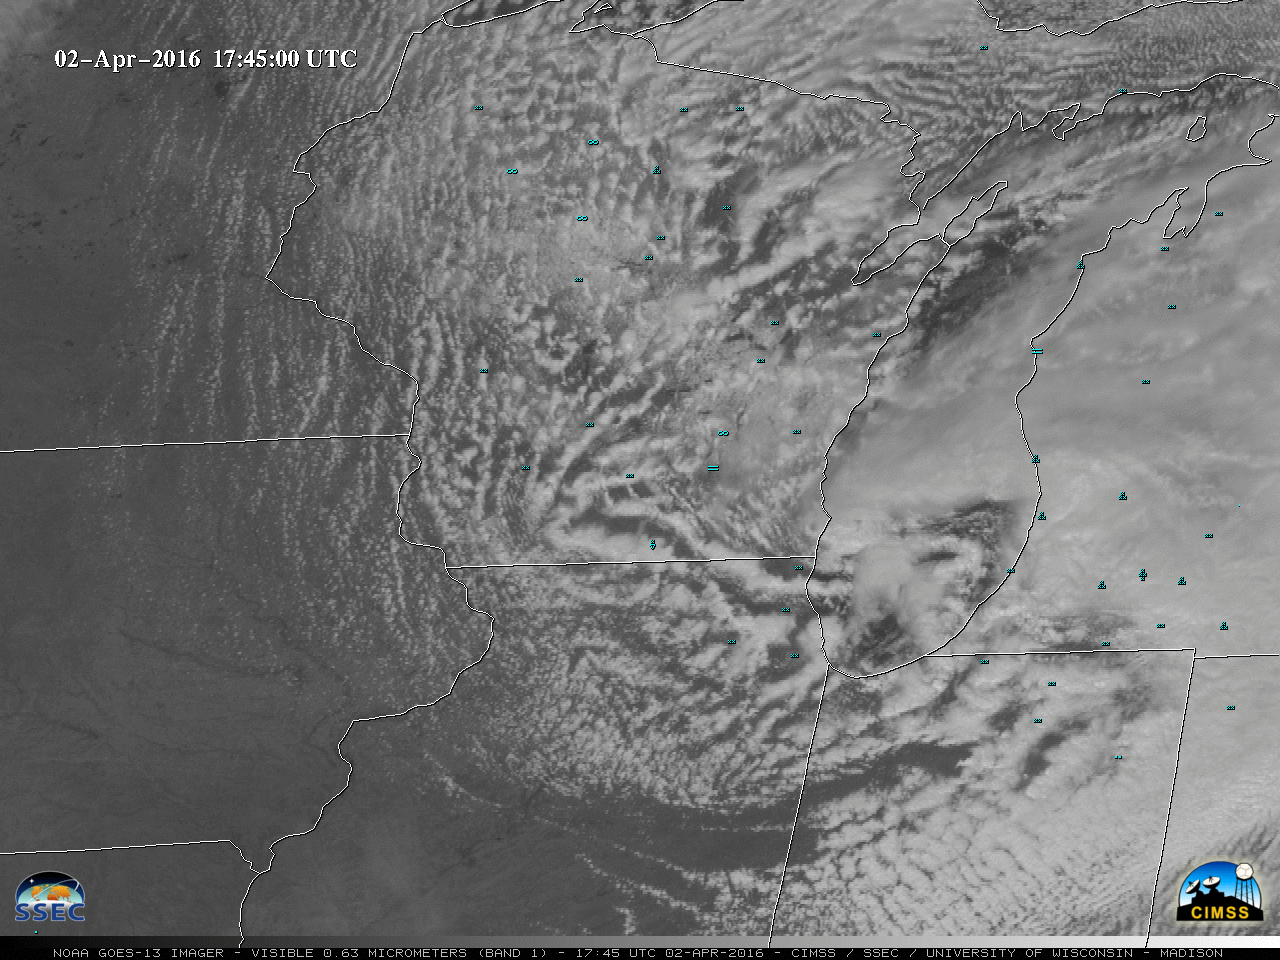 GOES-13 Visible (0.63 µm) images, with hourly surface weather symbols [click to play animation]